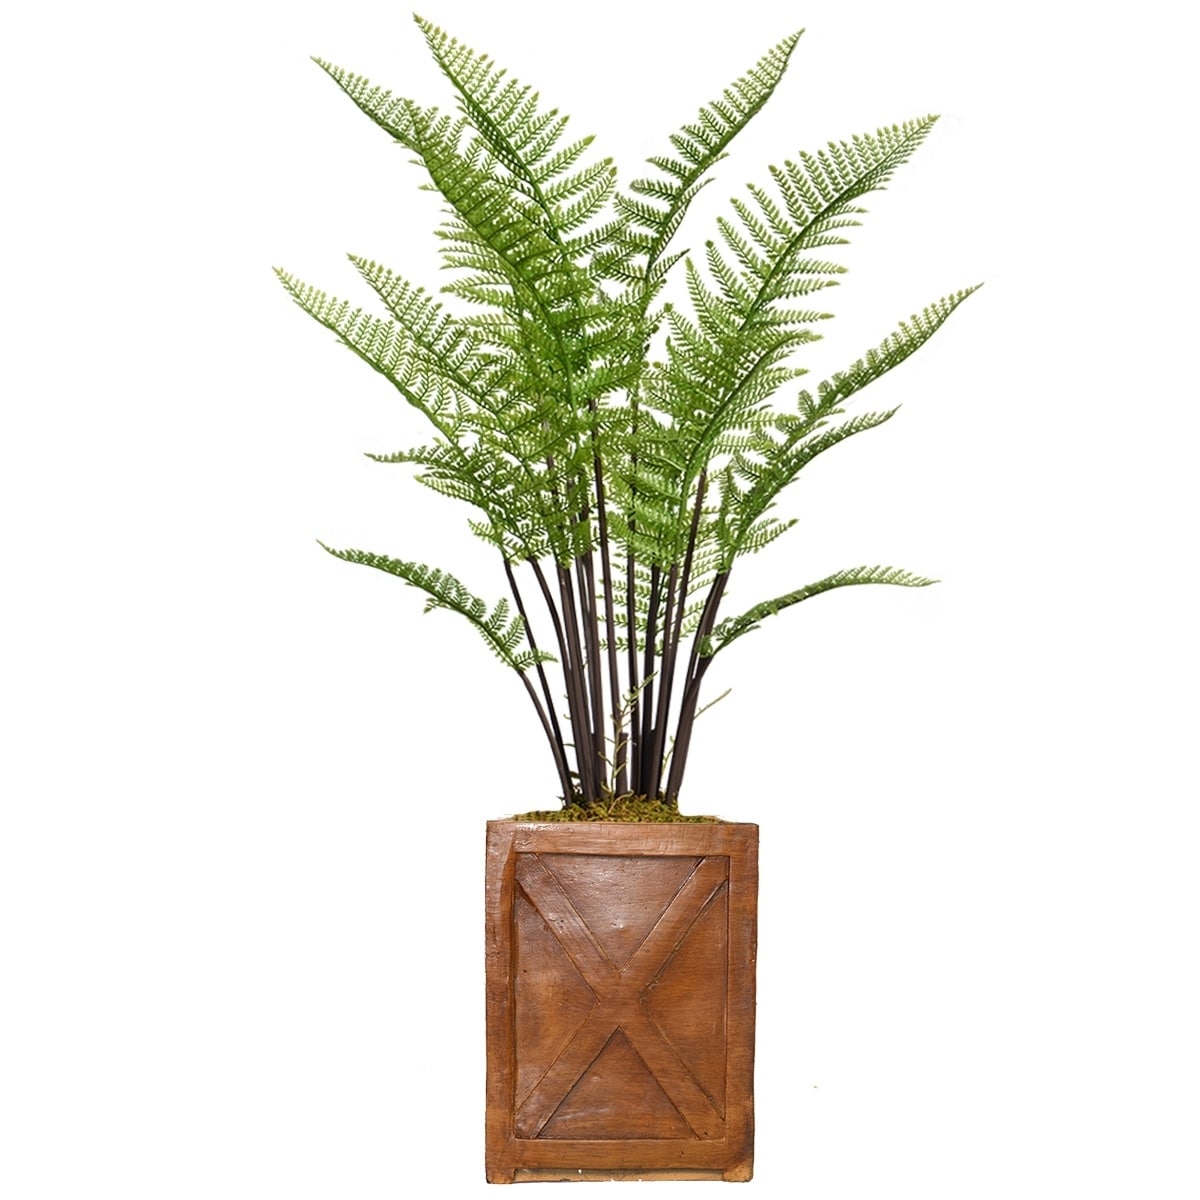 51 Tall Fern Plant With Burlap Kit And Fiberstone Planter Overstock